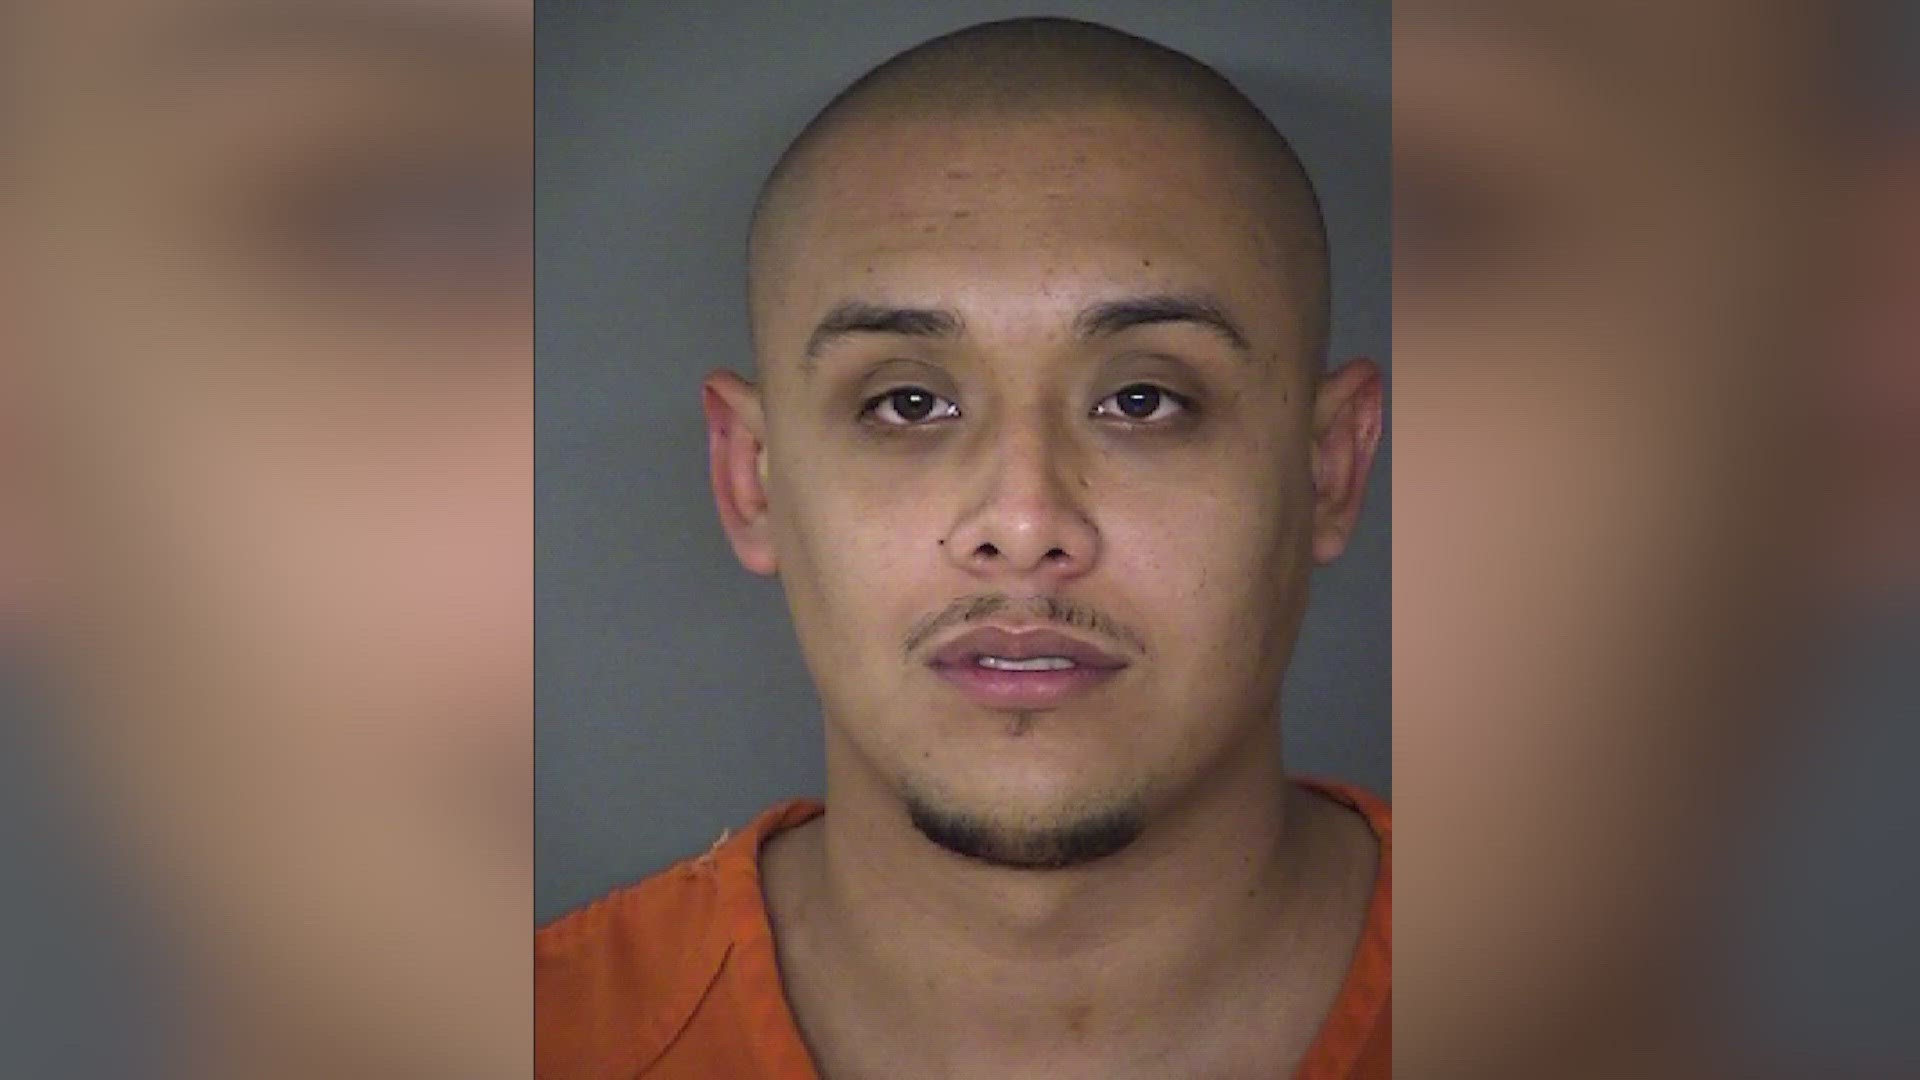 Police say they arrested 32-year old Roland Contreras, Jr.